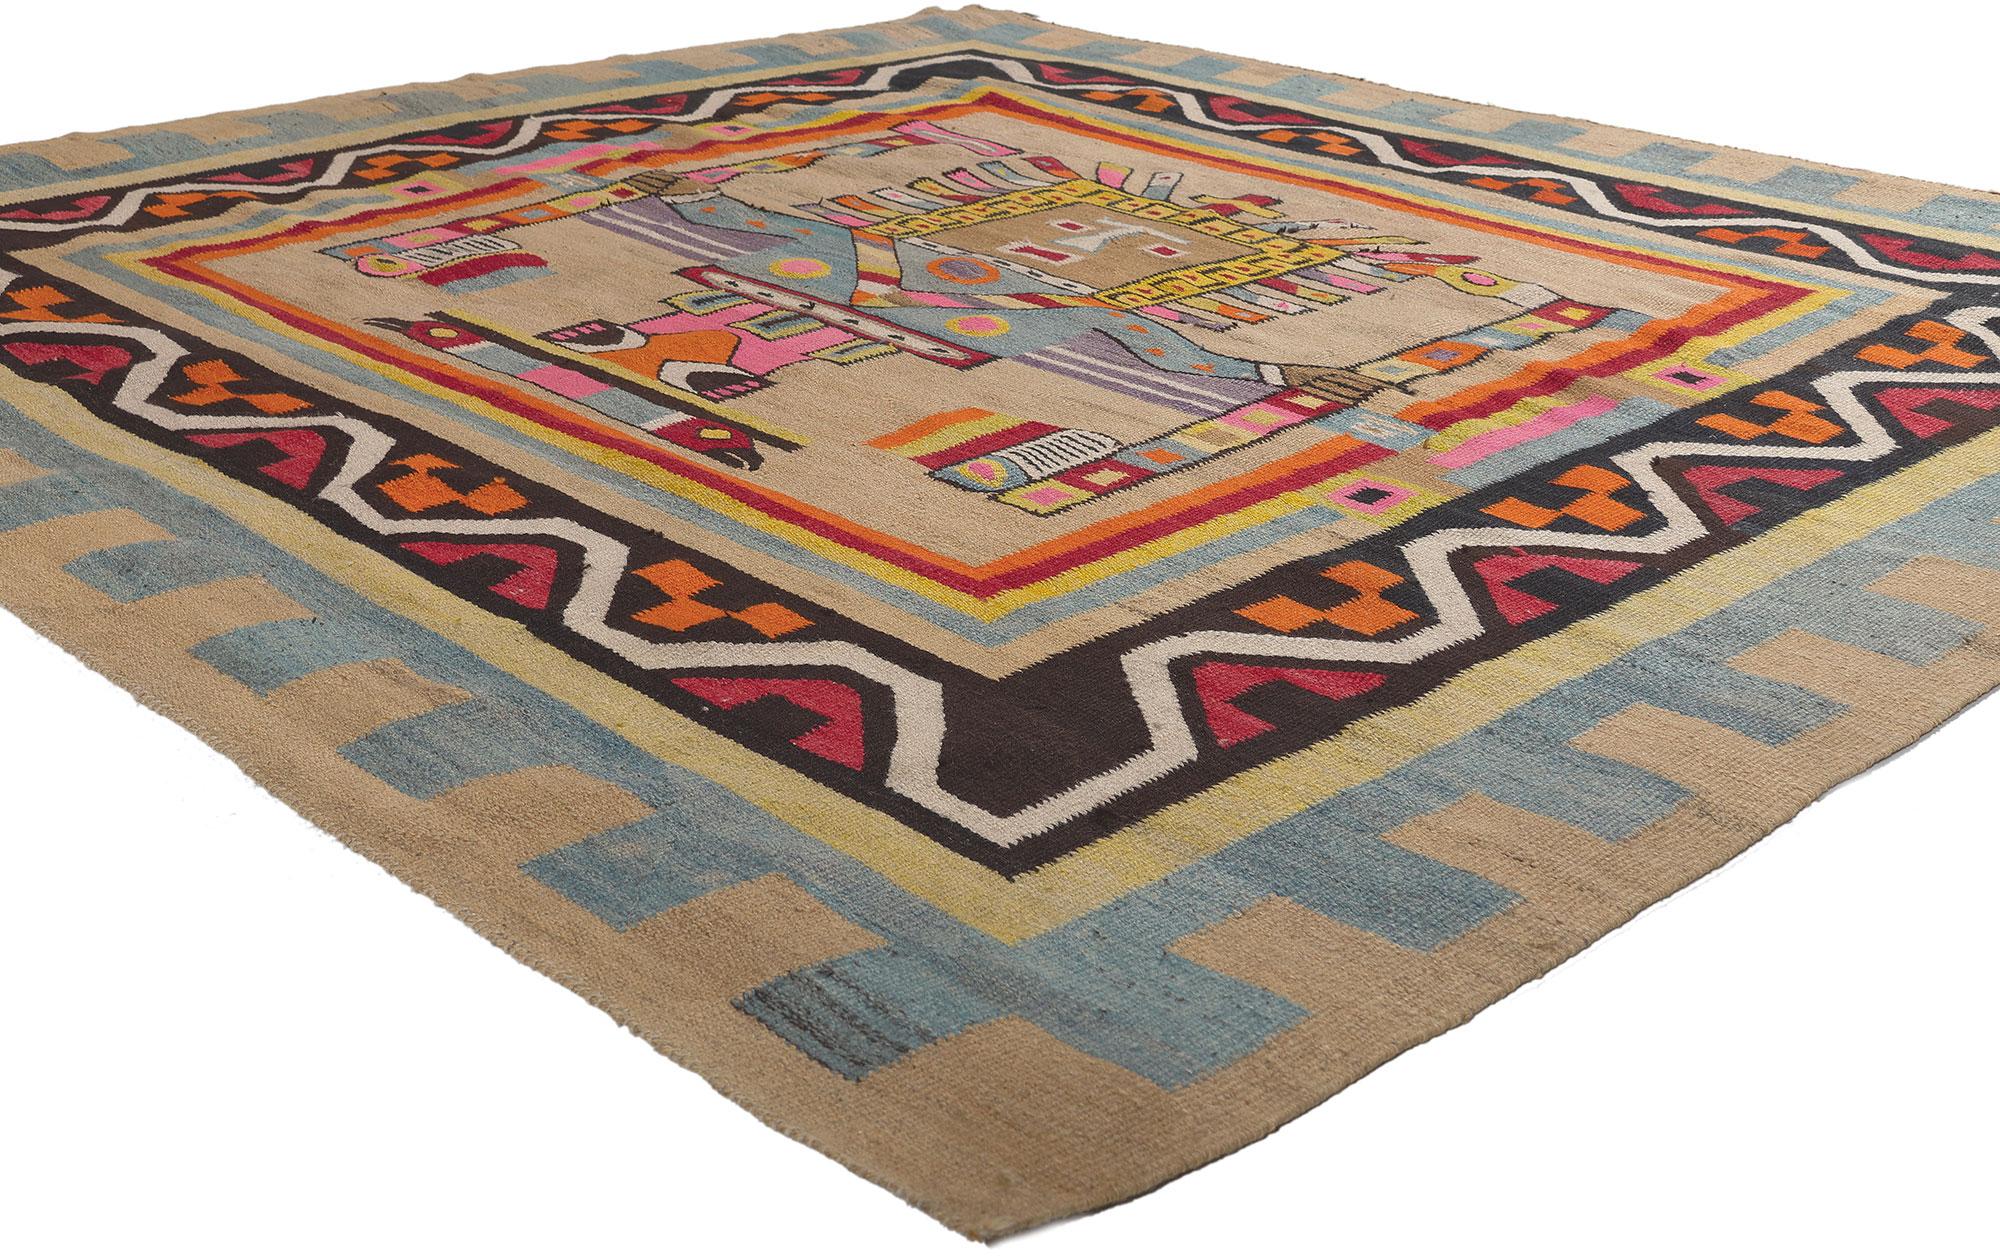 78610 Vintage South American Kilim Rug, 06'06 x 06'03. Emulating precolumbian art with incredible detail and texture, this handwoven wool vintage South American kilim rug is a captivating vision of woven beauty. The striking Viracocha design and